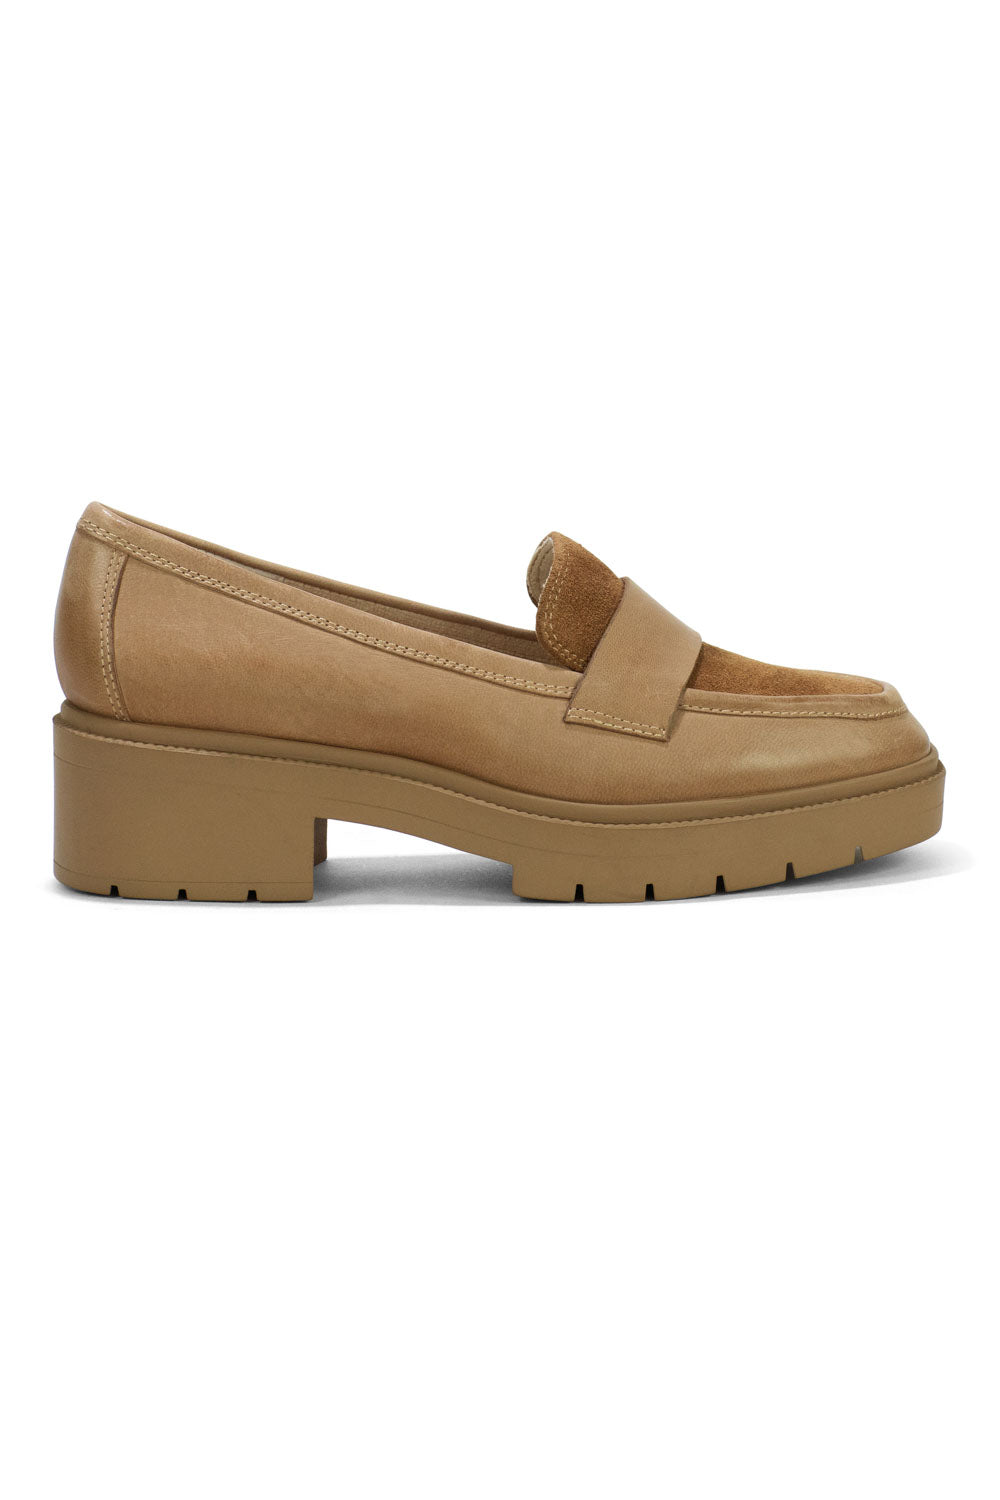 NYDJ Heidi Loafers In Waxed Calf Leather - Oyster